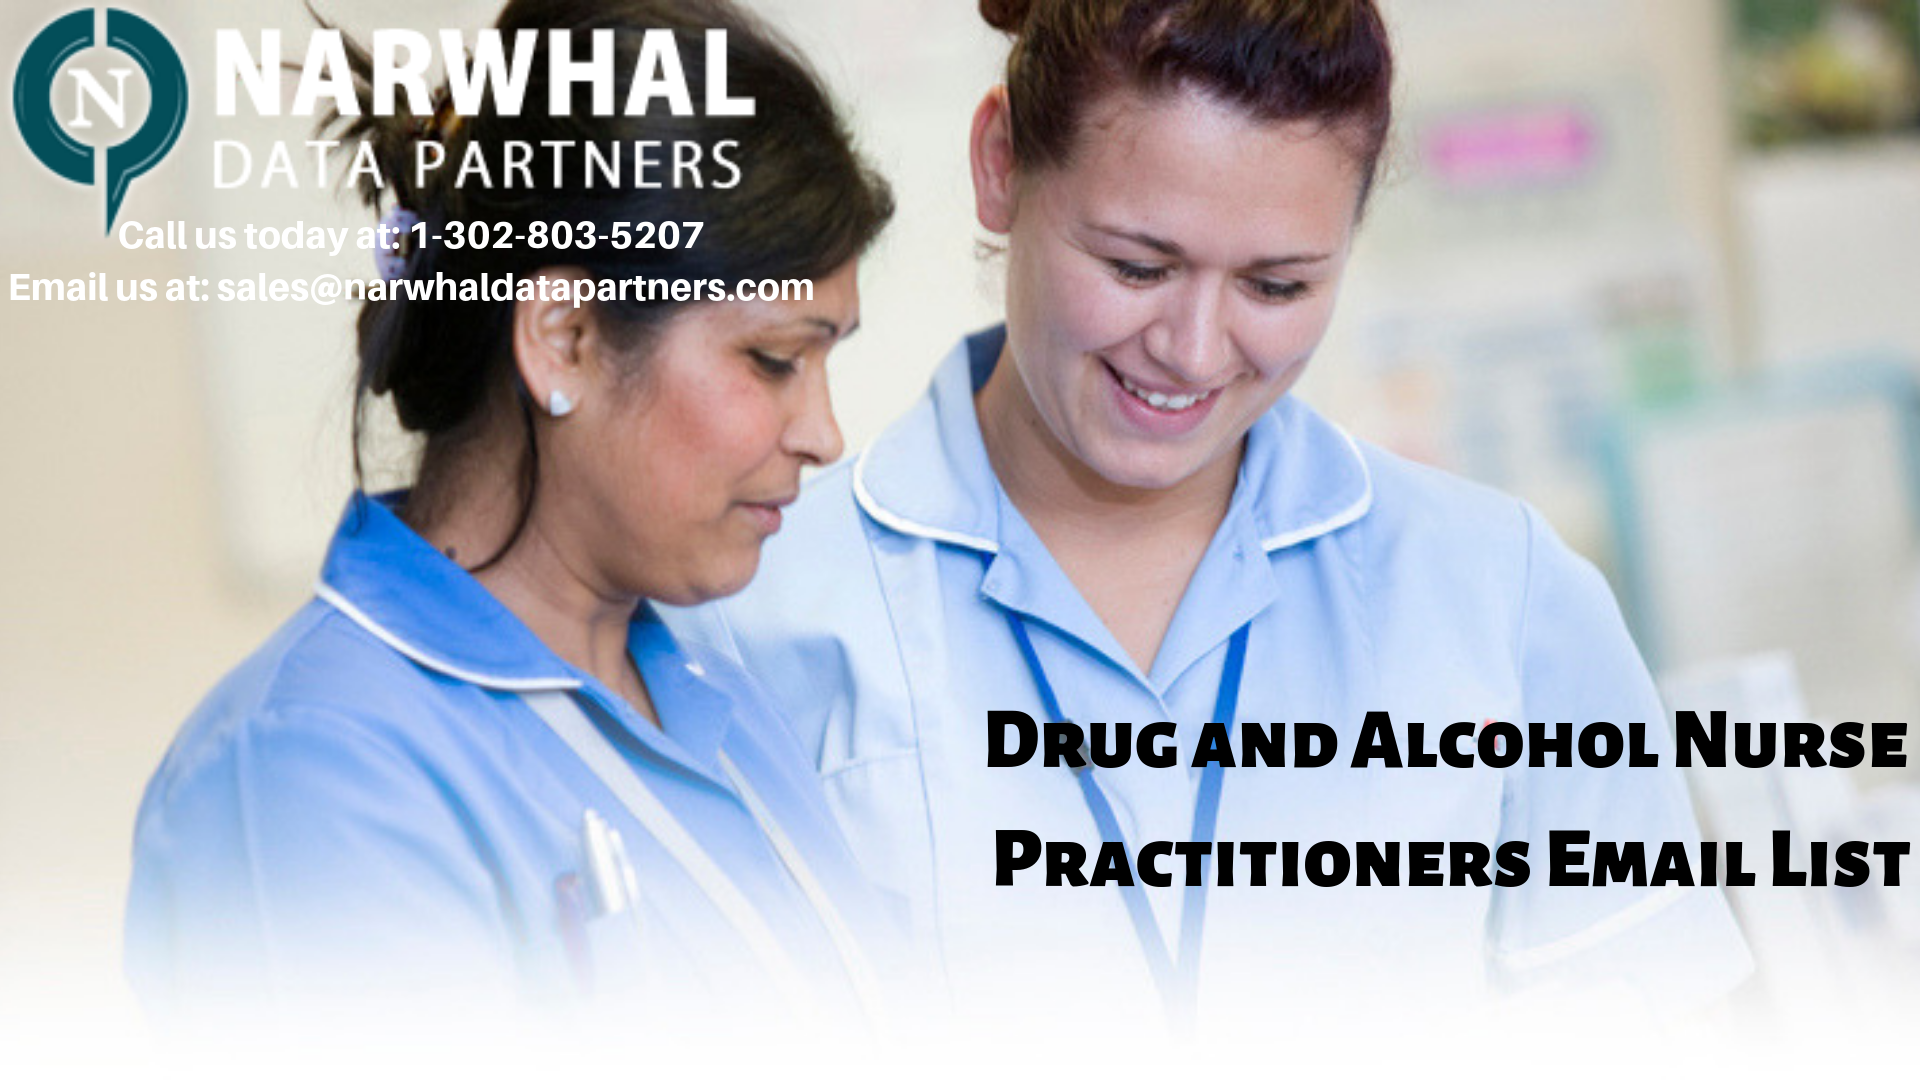 http://narwhaldatapartners.com/drug-and-alcohol-nurse-practitioners-email-list.html